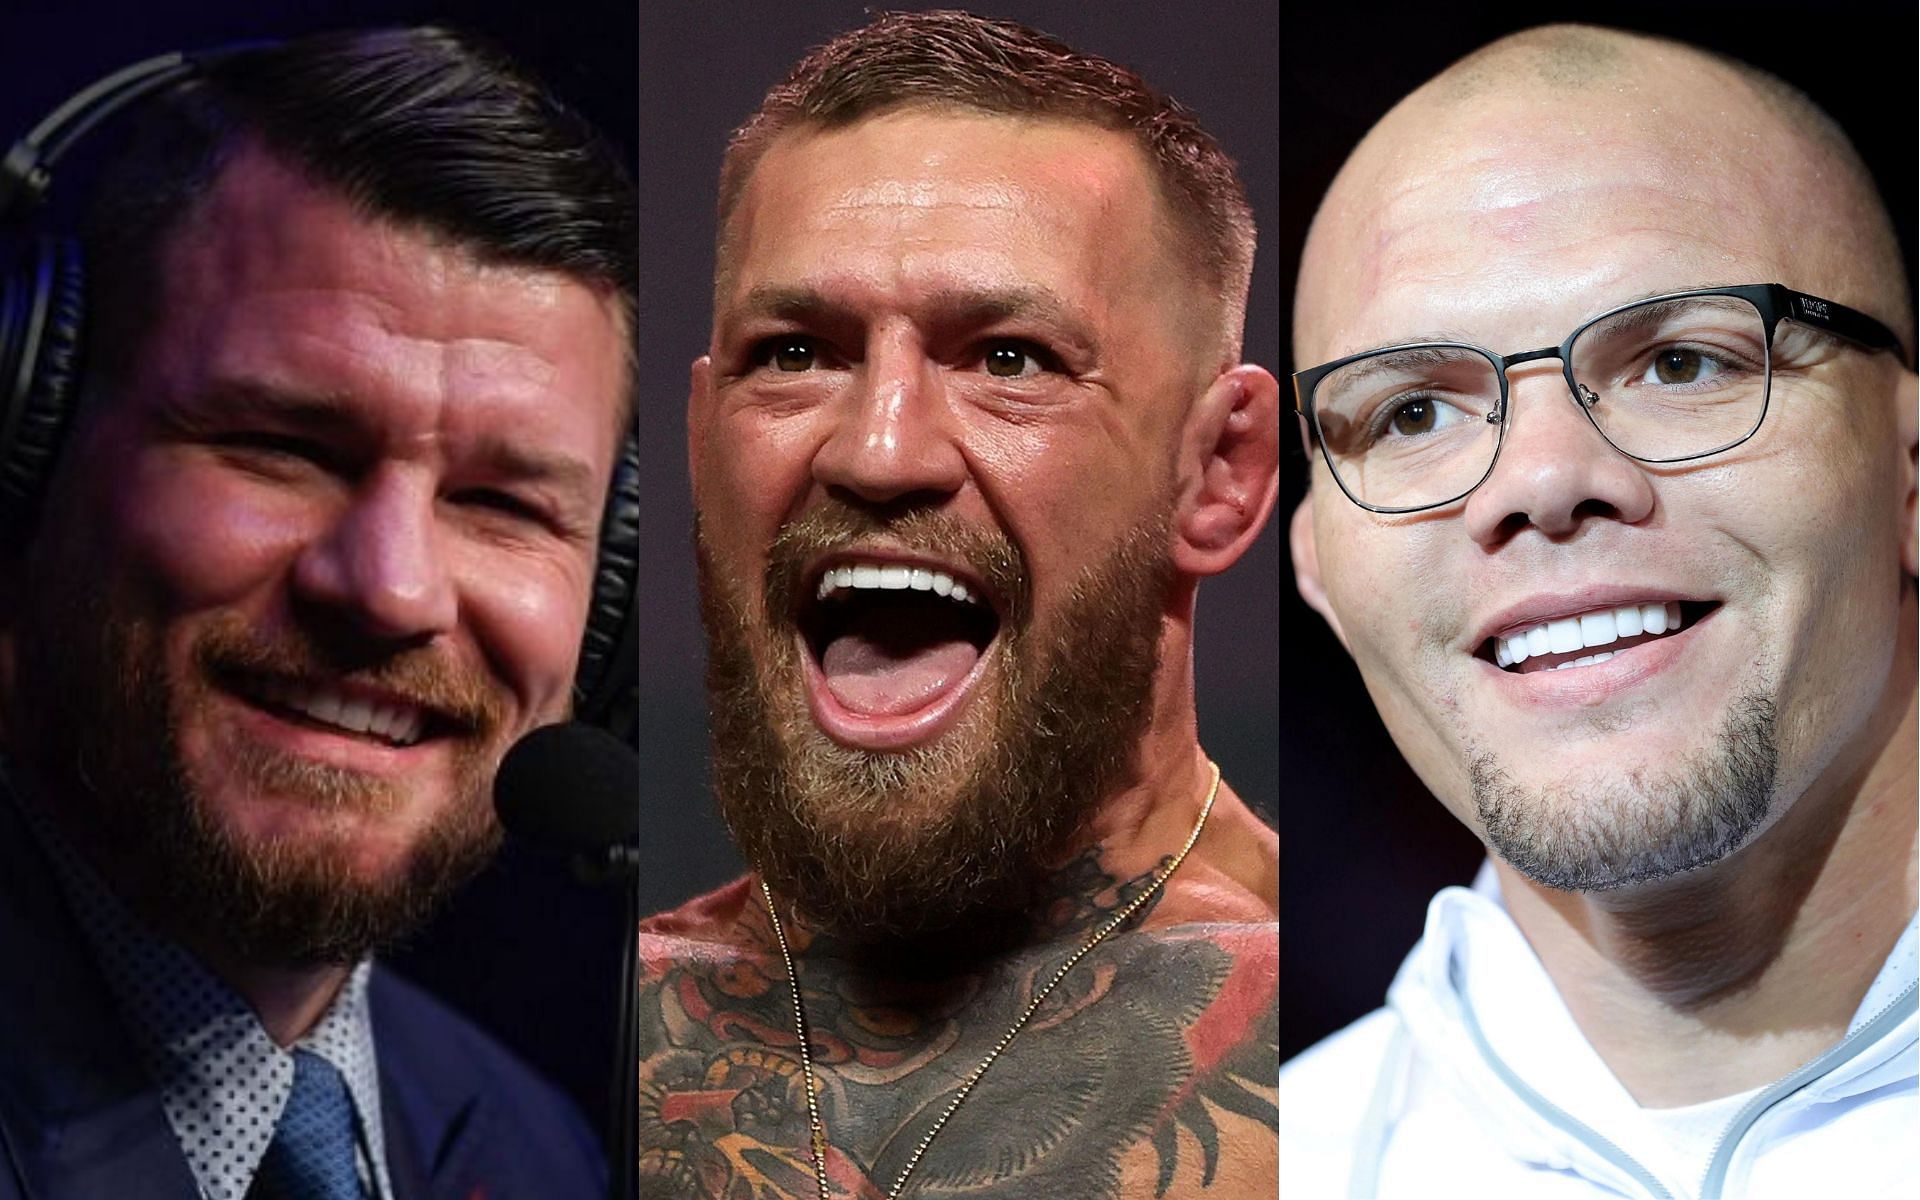 Michael Bisping (left), Conor McGregor (center), &amp; Anthony Smith (right)